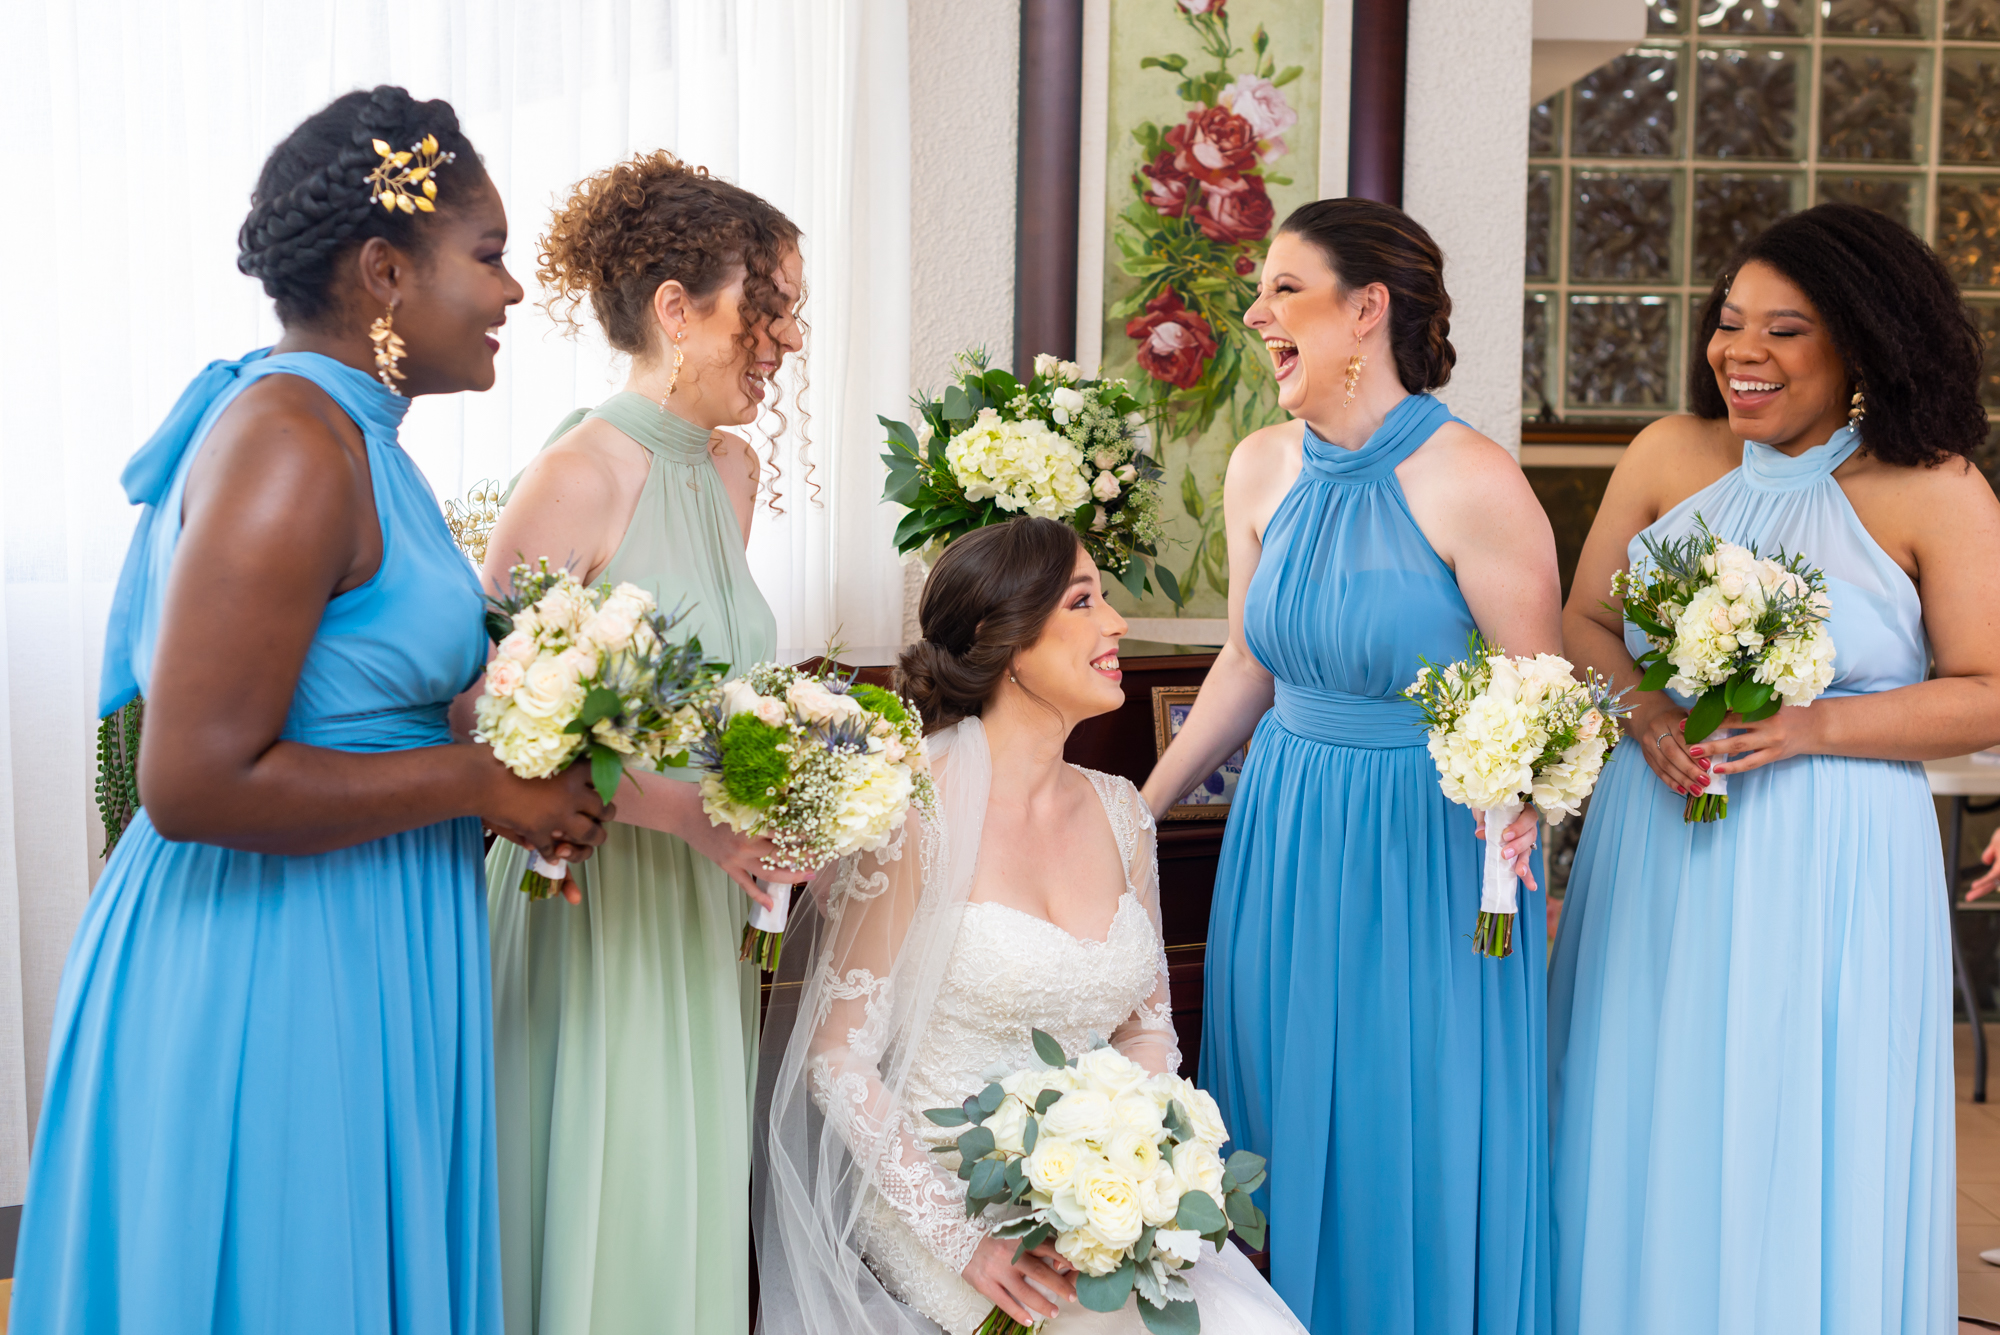 Bride and bridesmaids can't contain laugh